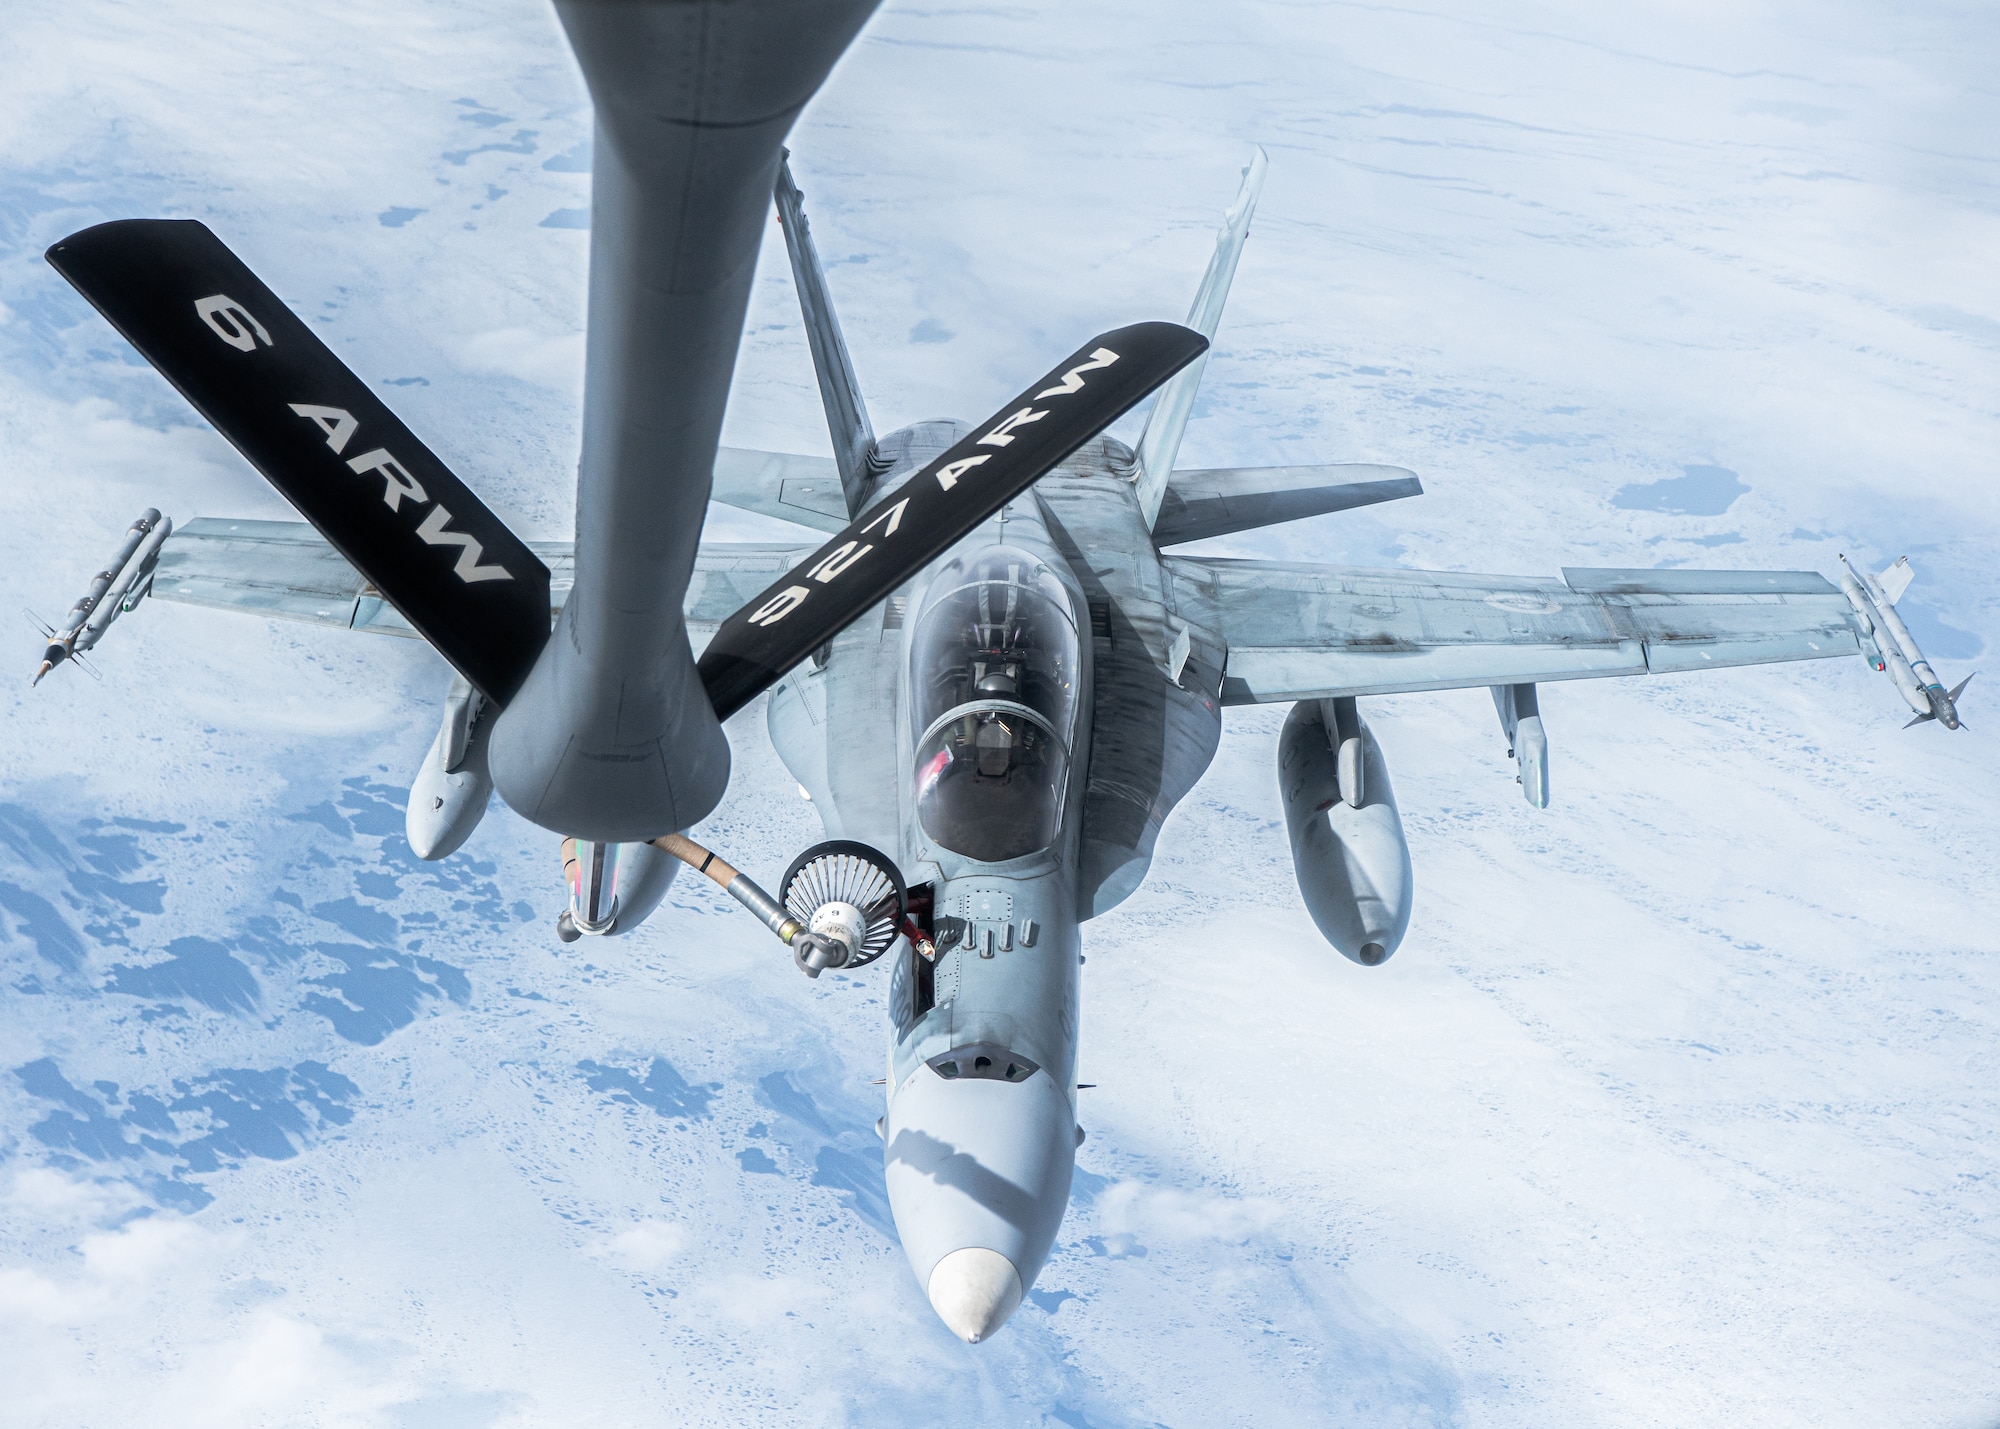 A KC-135 Stratotanker aircraft assigned to the 6th Air Refueling Wing provides aerial refueling for a CF-18 Hornet aircraft assigned to the 433rd Tactical Fighter Squadron in support of North American Aerospace Defense Command's (NORAD) Operation Noble Defender (OND), March 16, 2022.